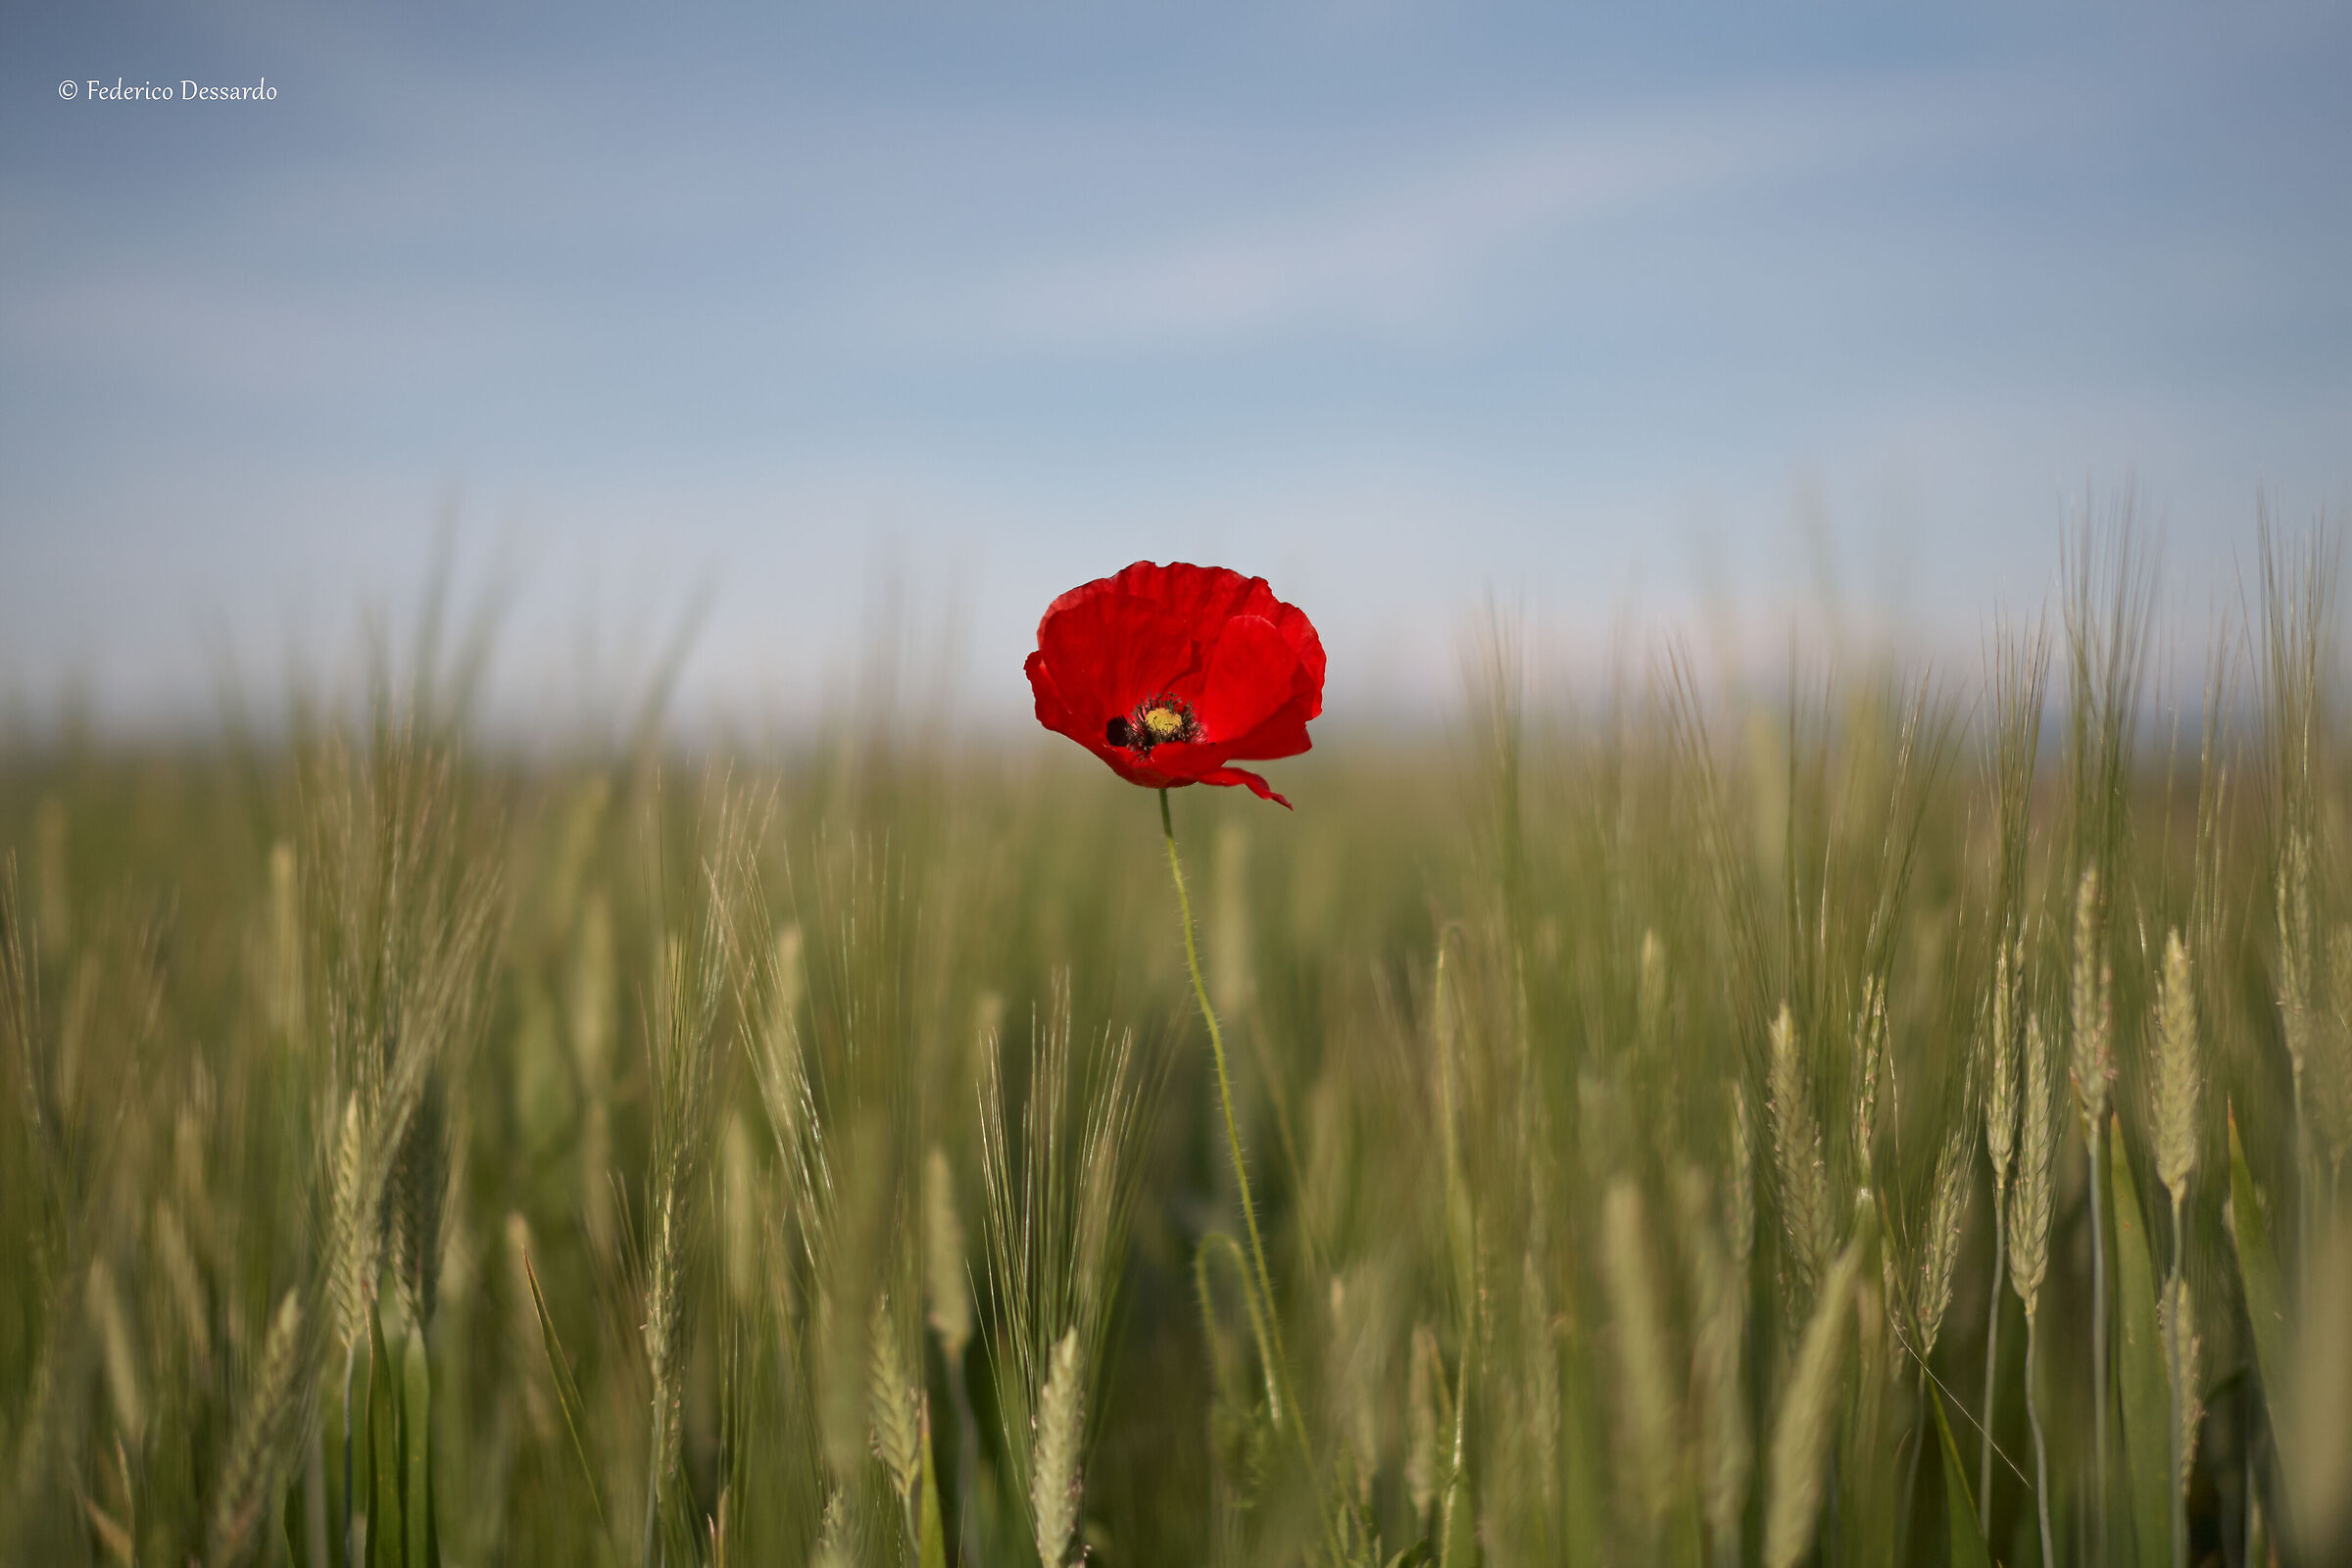 The charm of the poppy...